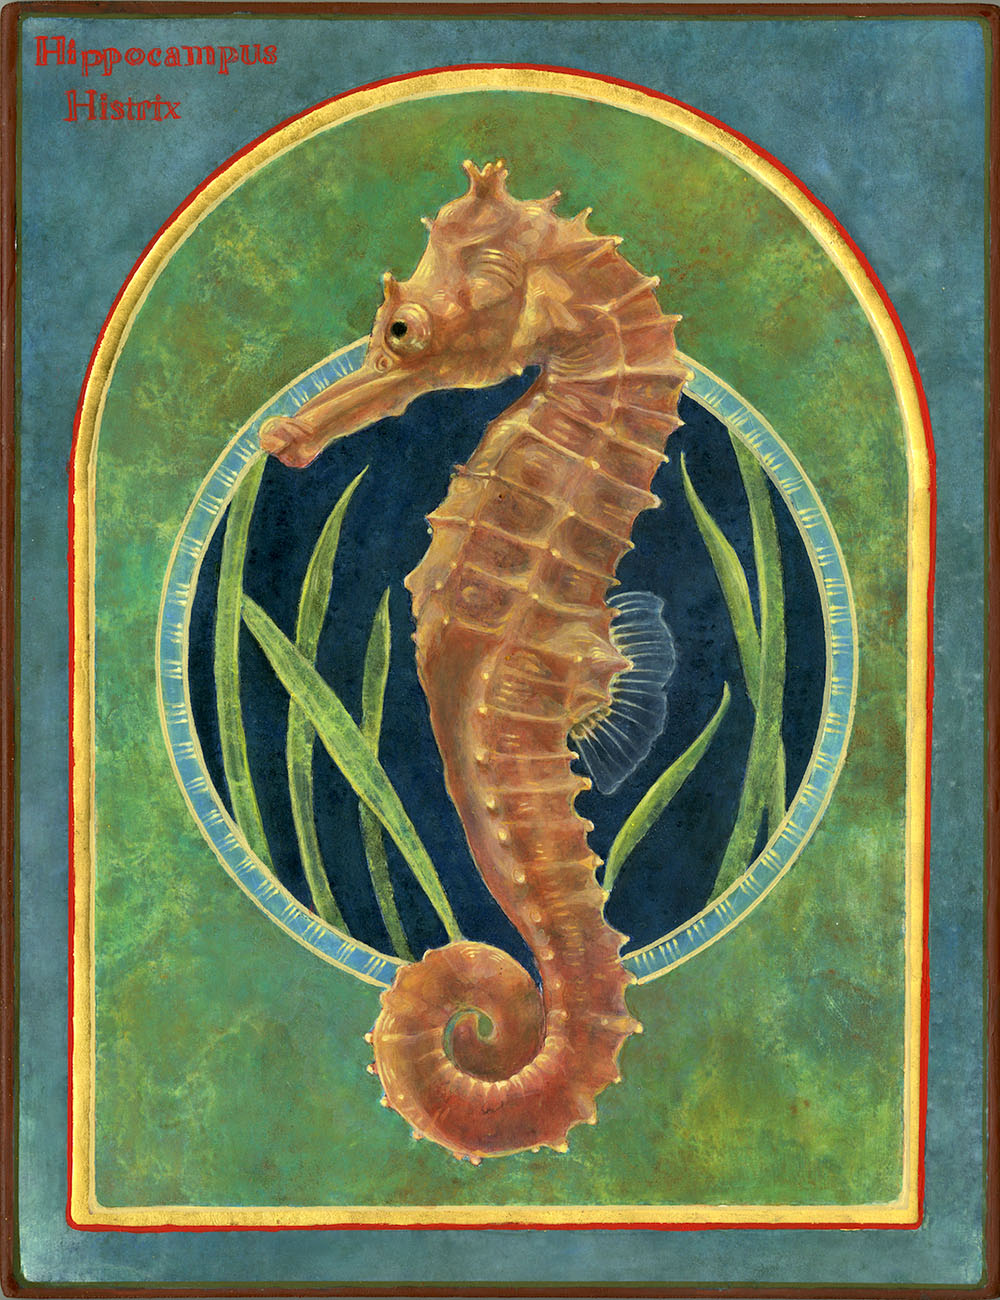 Angela Manno, The Sea Horse, Hippocampus Histrix. Egg Tempera and Gold Leaf on Wood. 9” x 7” x 1.” ©2022 Angela Manno. Courtesy of the artist.